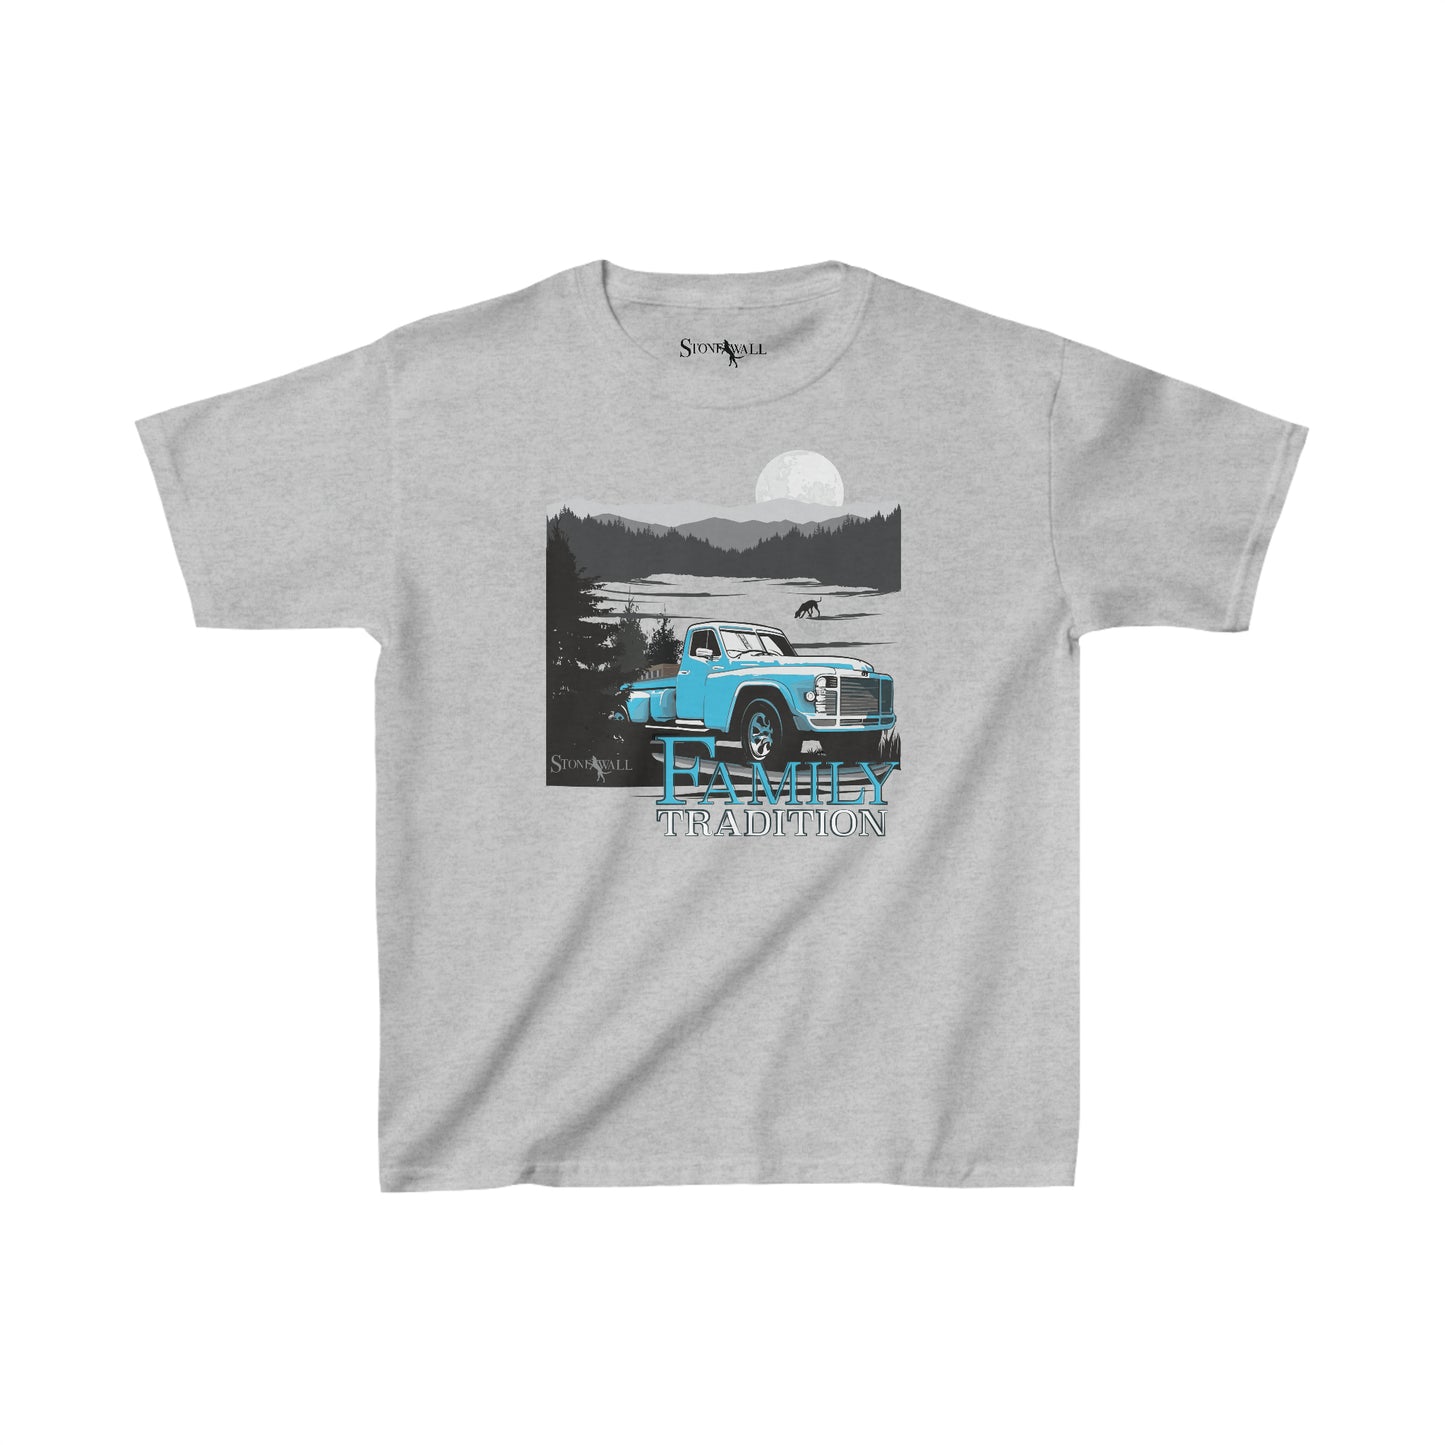 Youth- Family Tradition tee